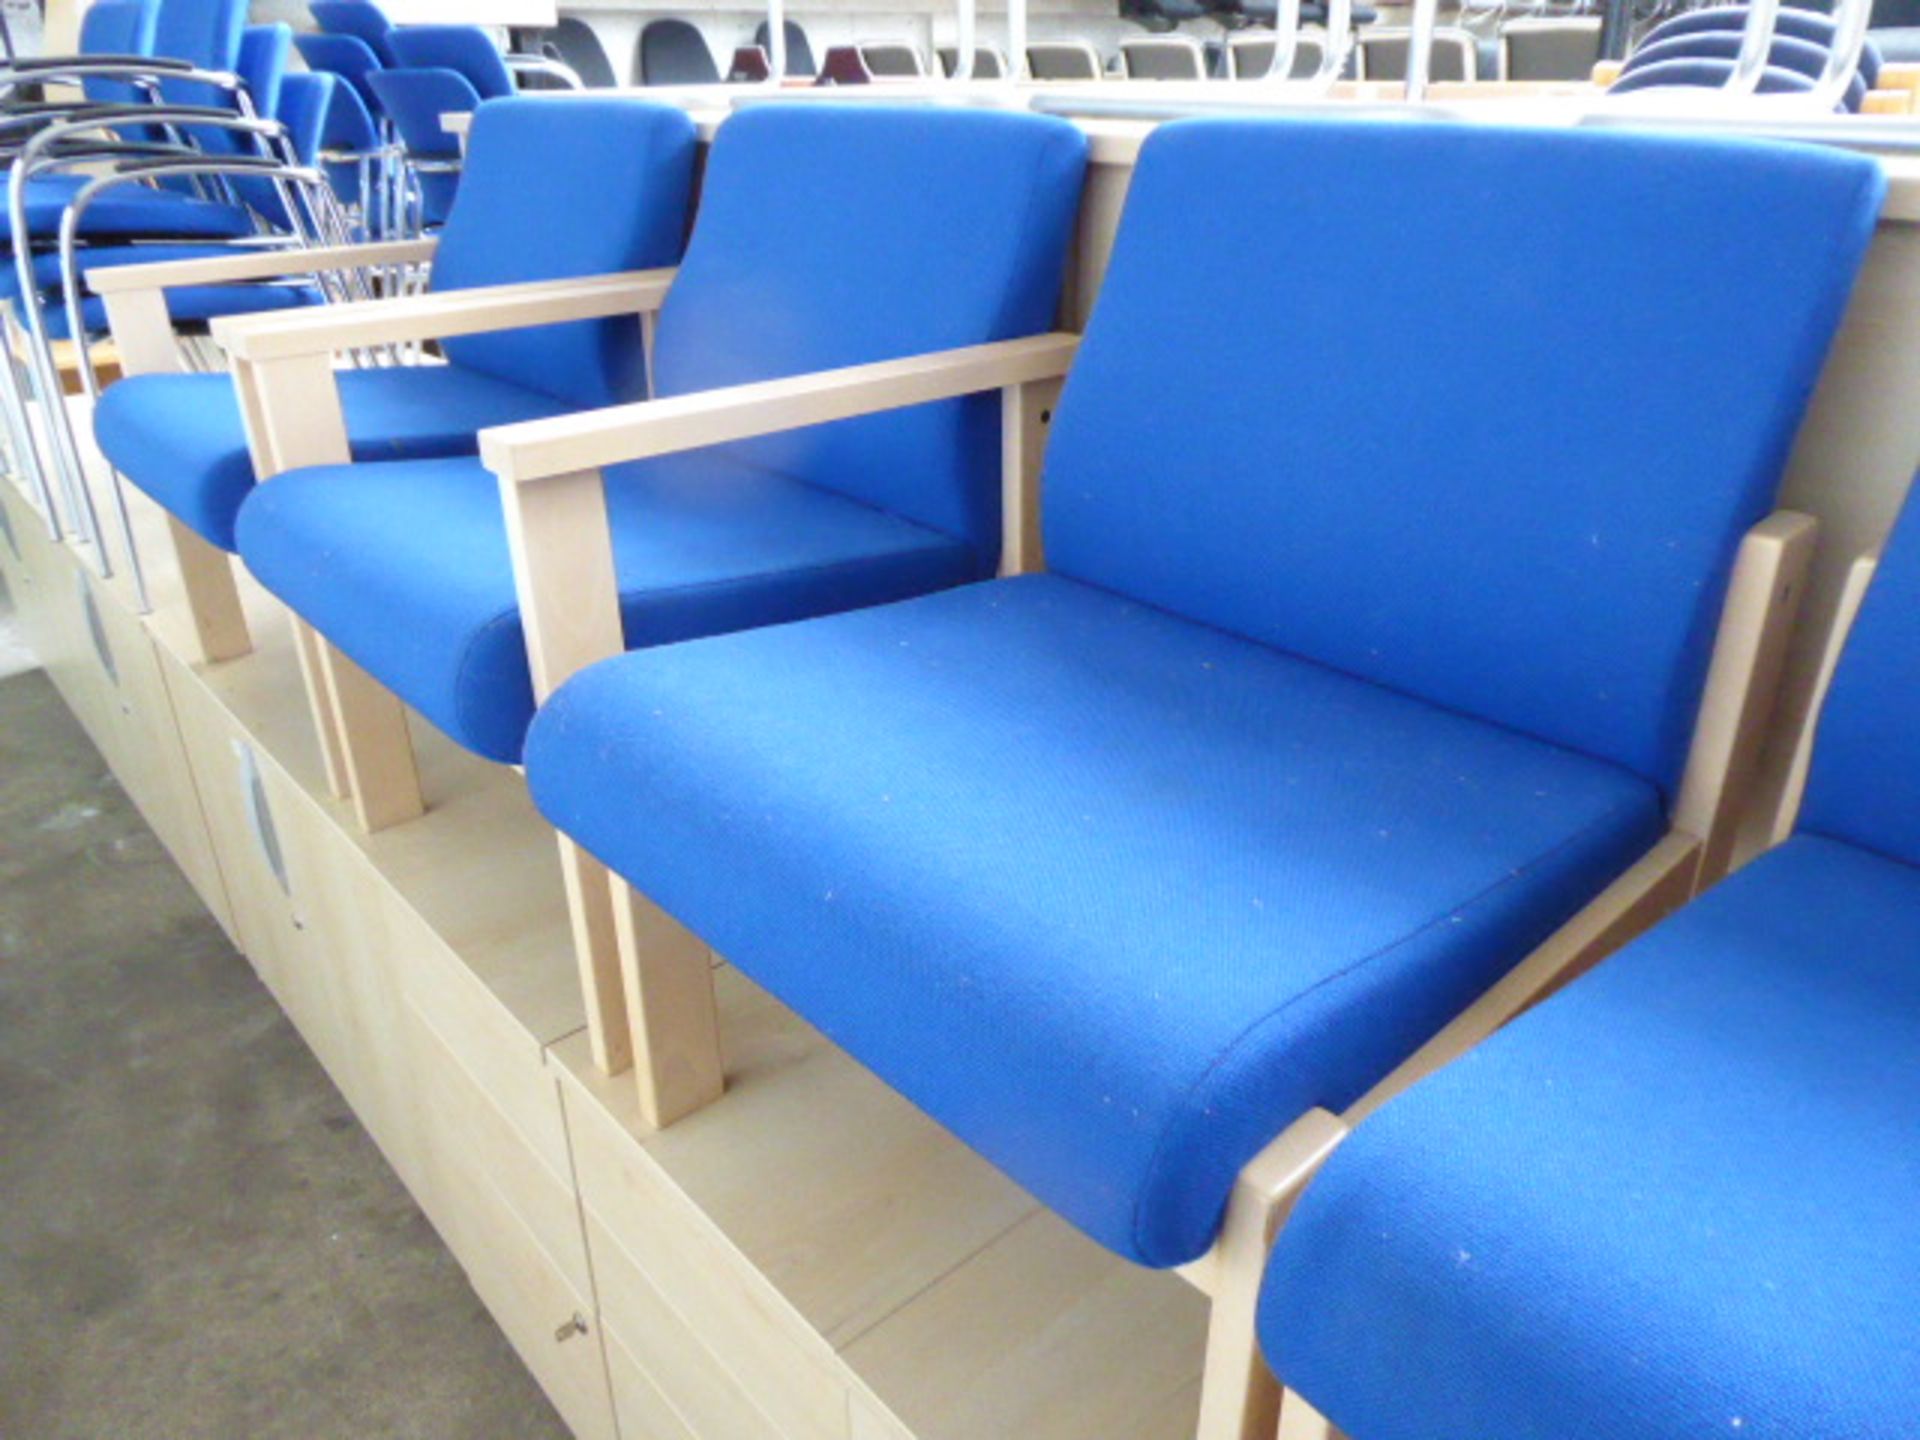 Set of 6 blue cloth reception chairs, 2 with arms - Image 2 of 2